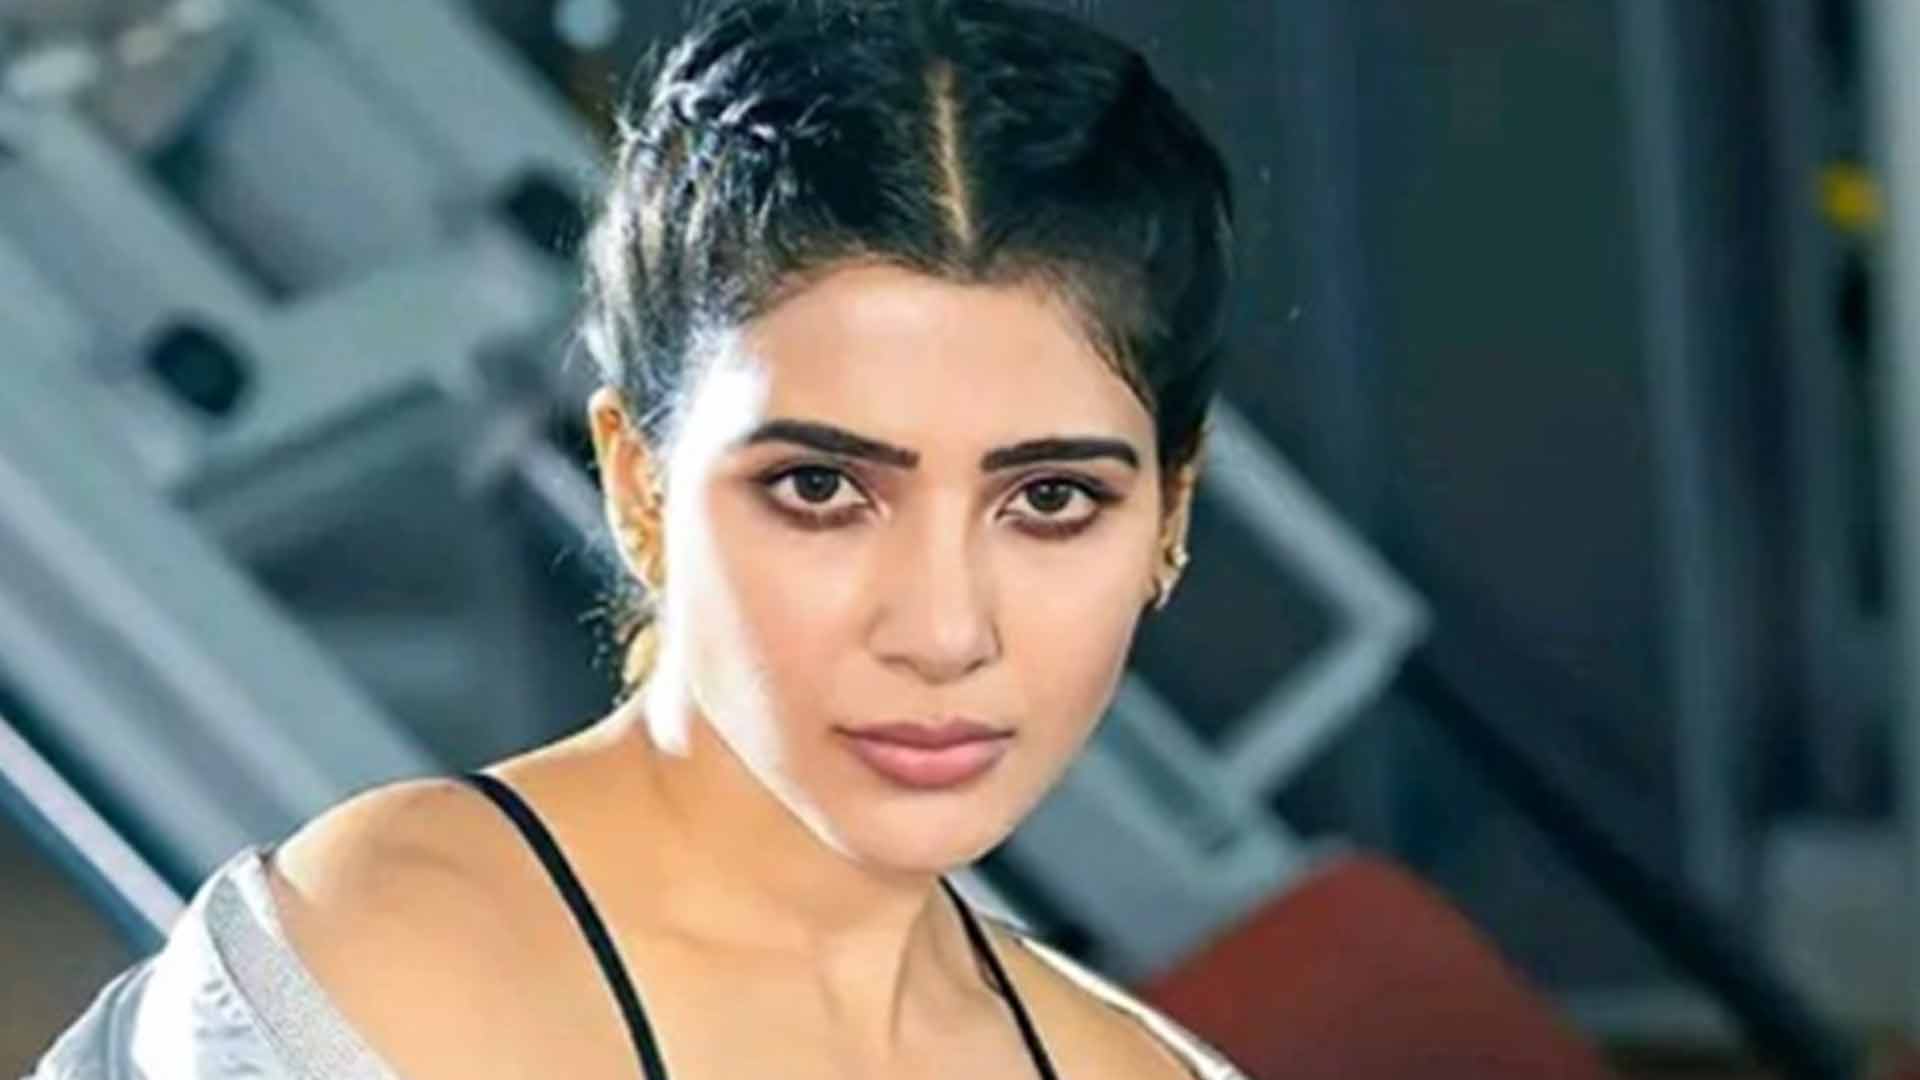 Samantha desires two children without marriage